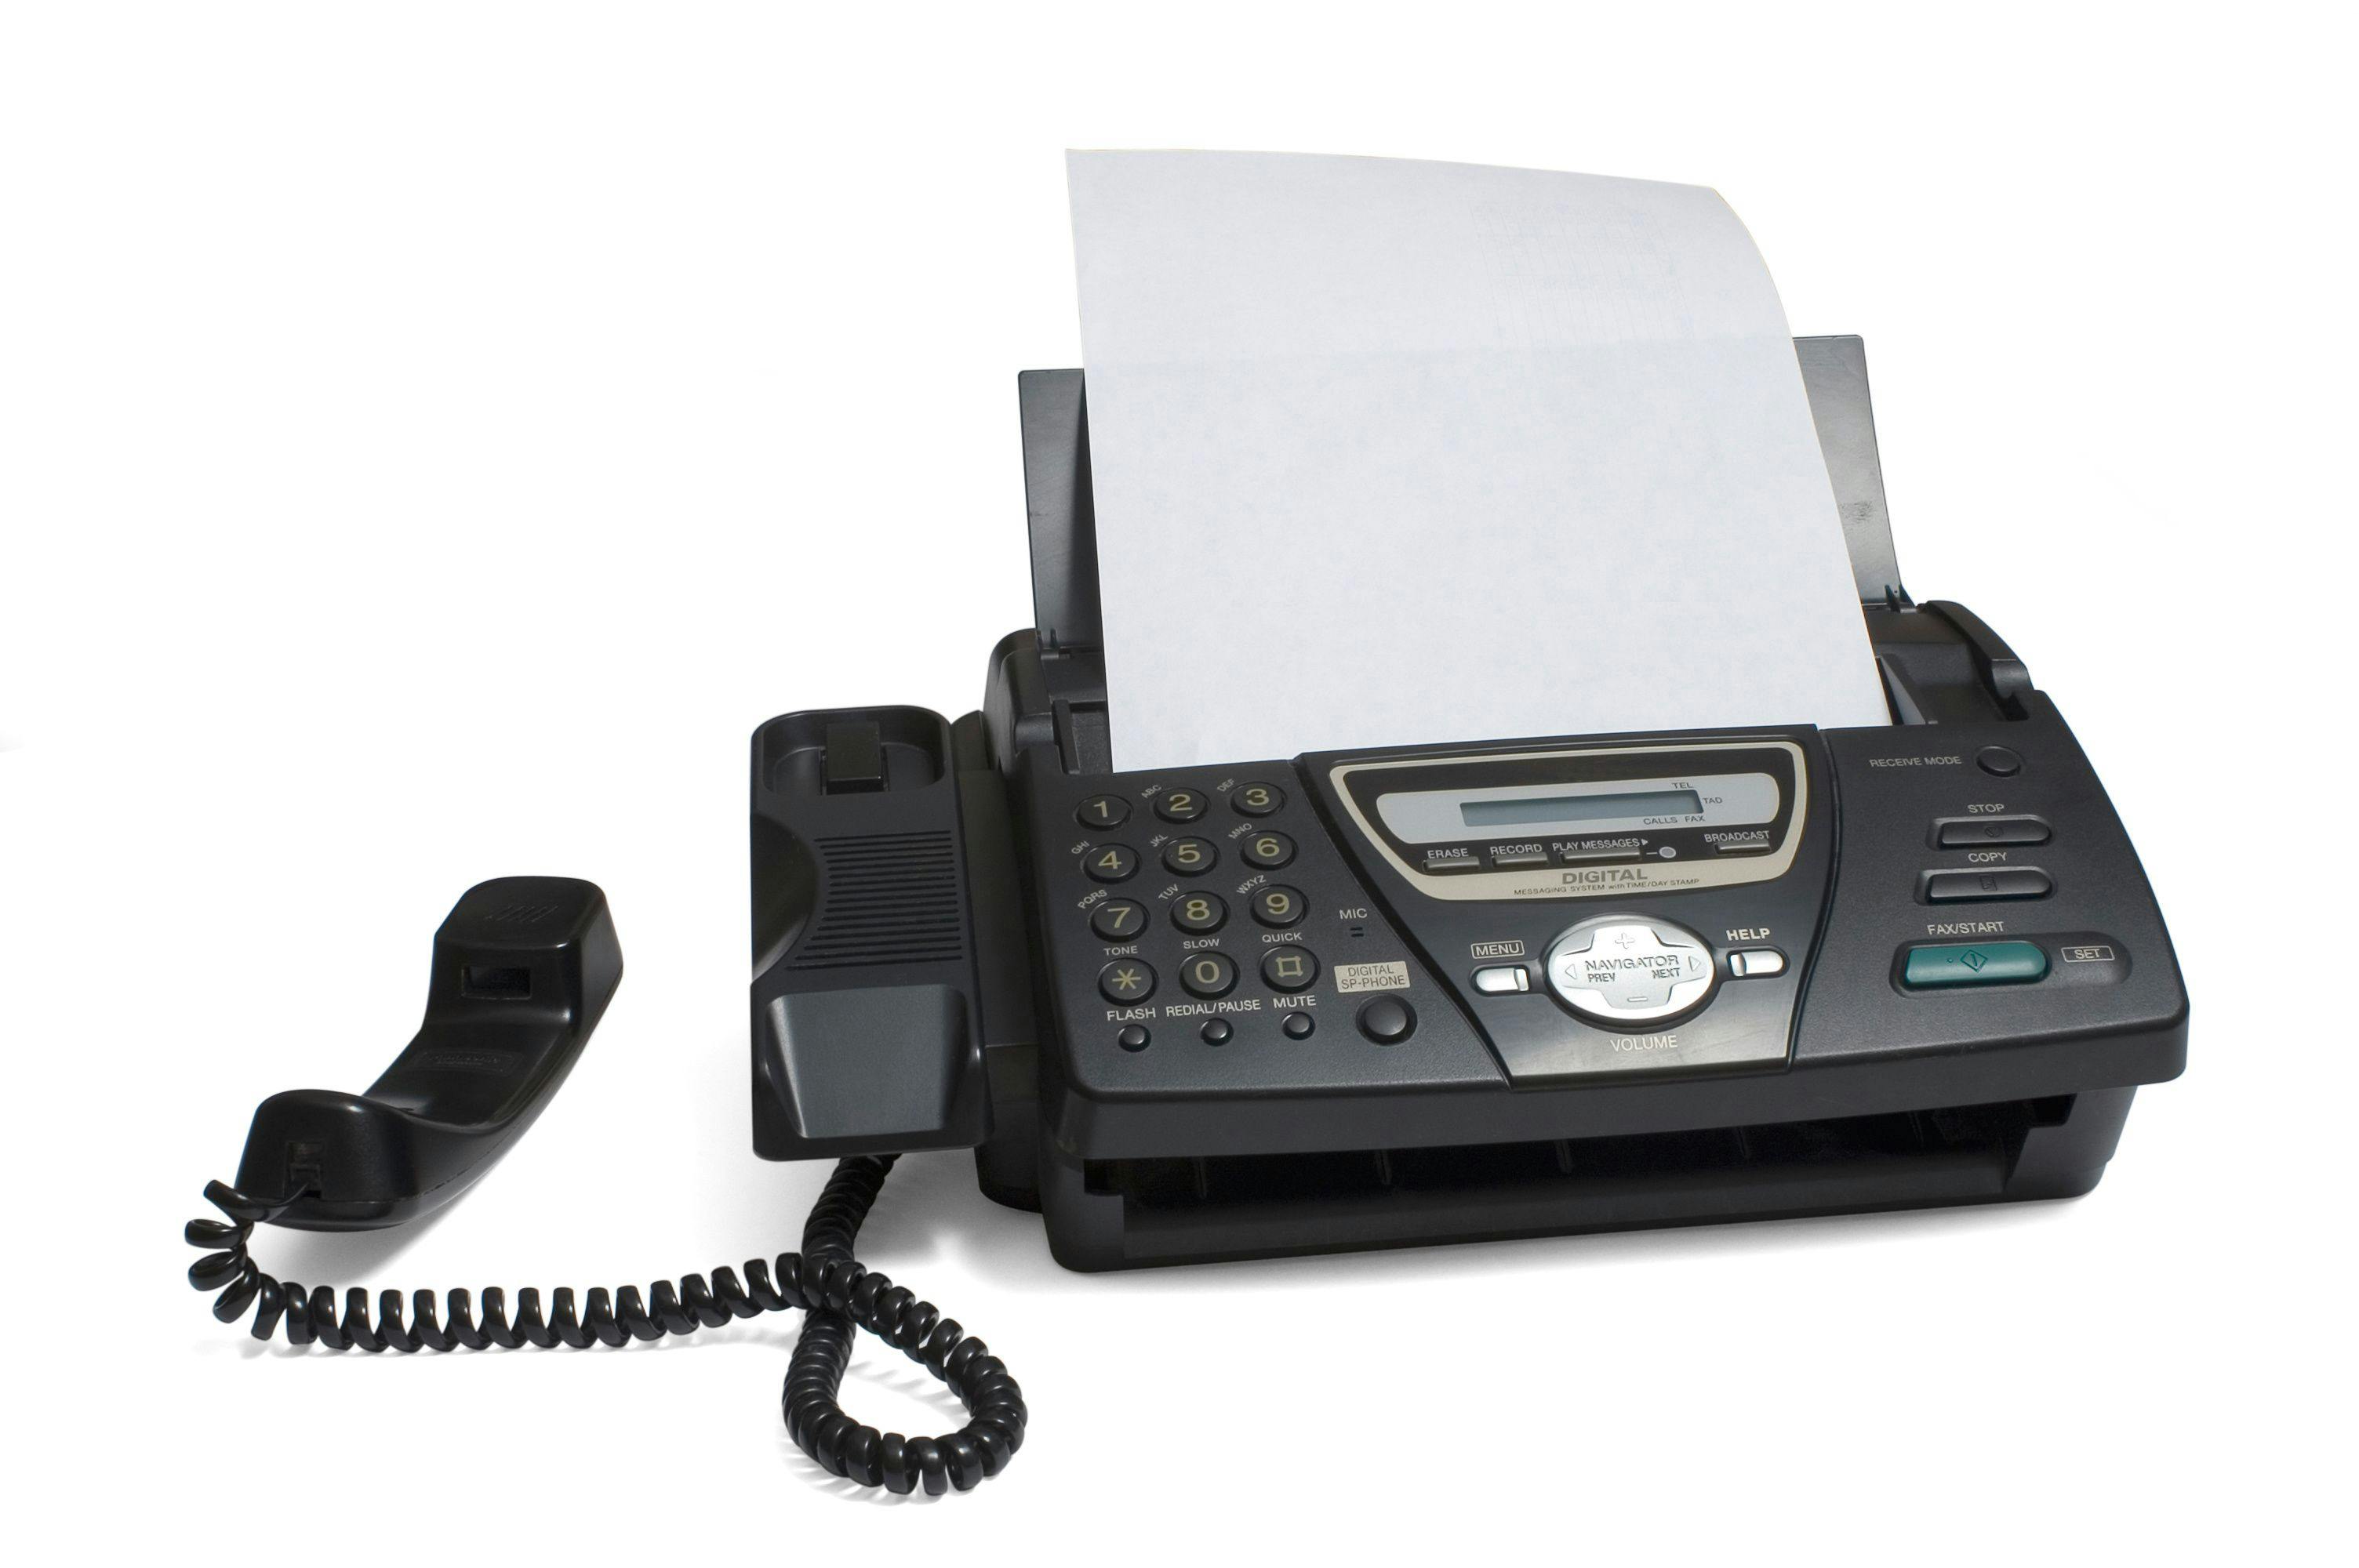 fax machine, HIE, electronic patient record, multifunction scanner